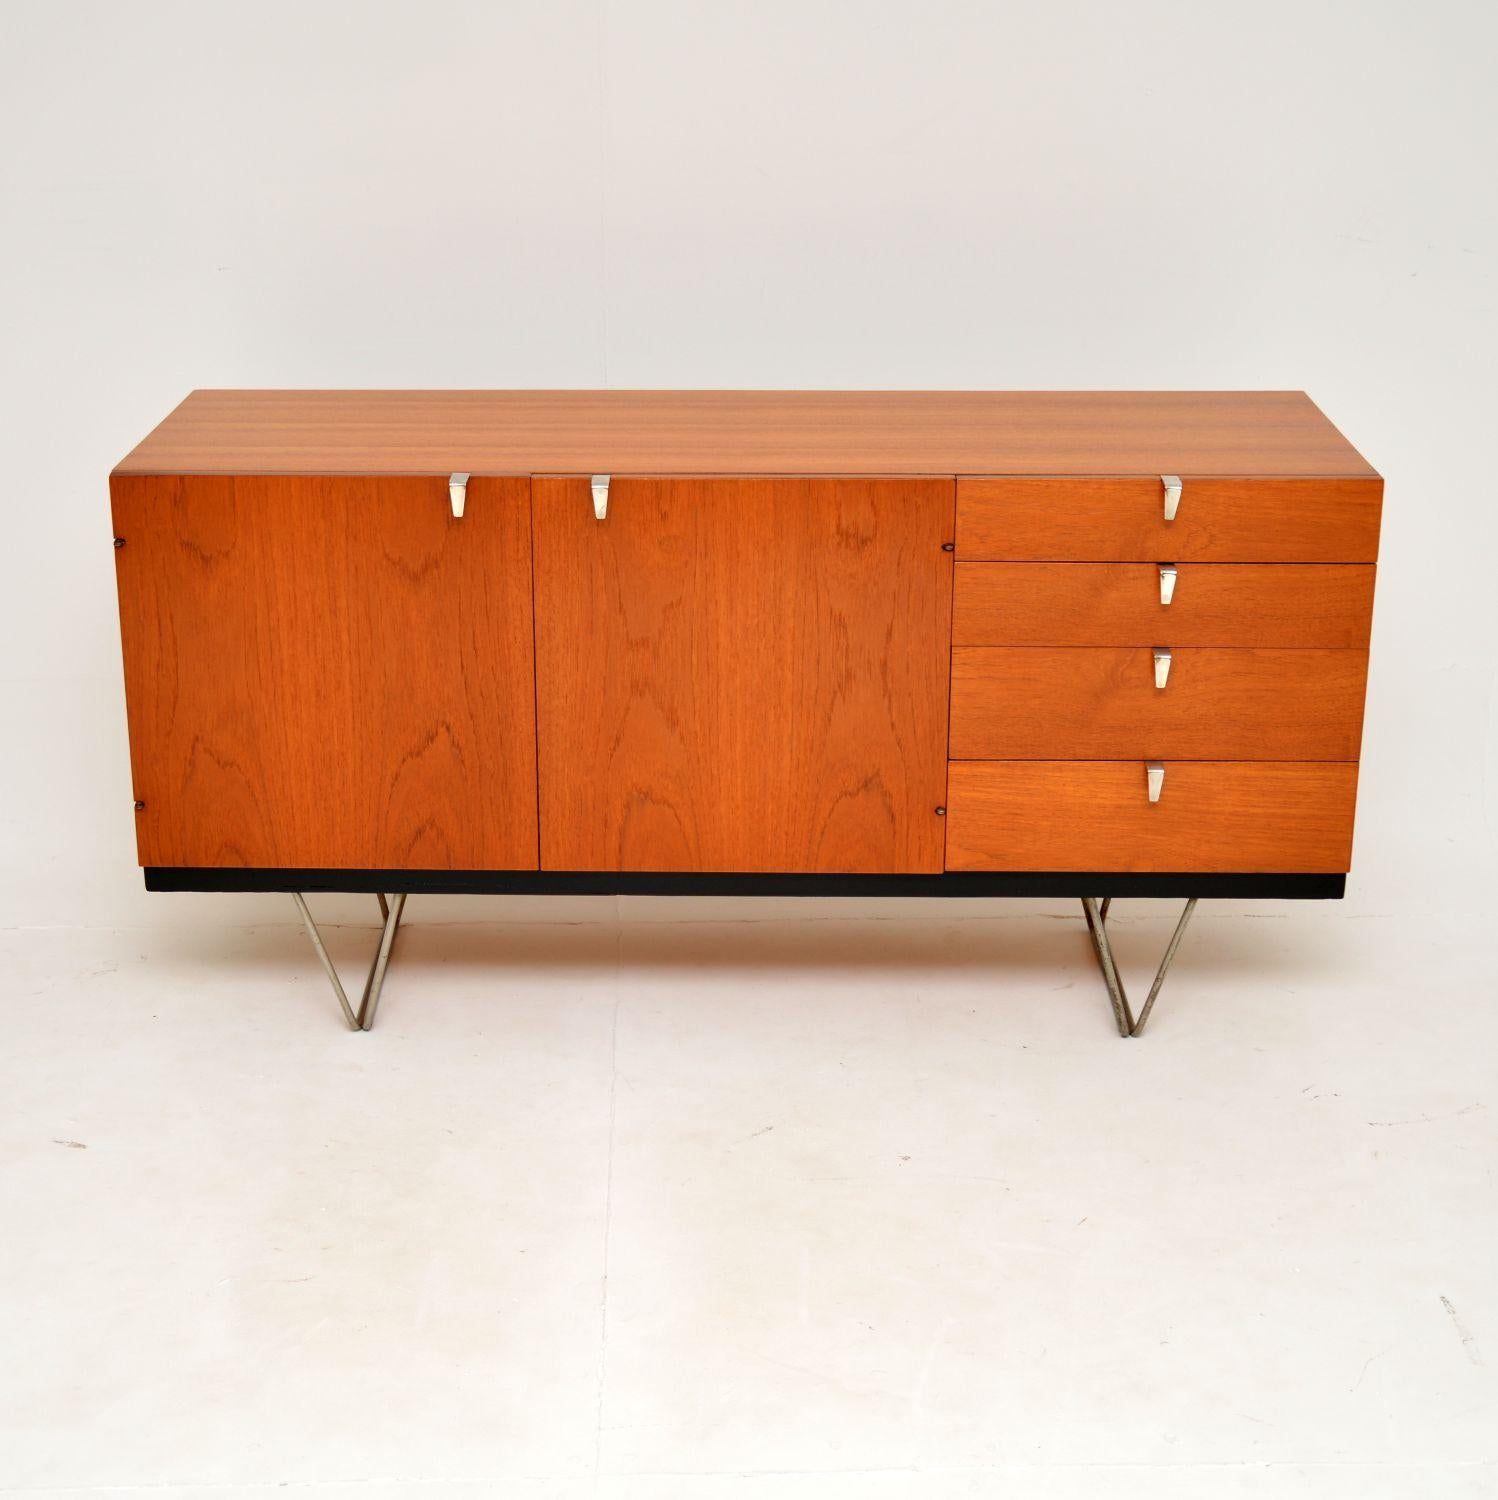 A fantastic vintage teak S range sideboard by John and Sylvia Reid for Stag. This was made in England in the 1960’s.

An extremely stylish an iconic design, instantly recognizable from its lovely hair pin steel legs. These were only produced between